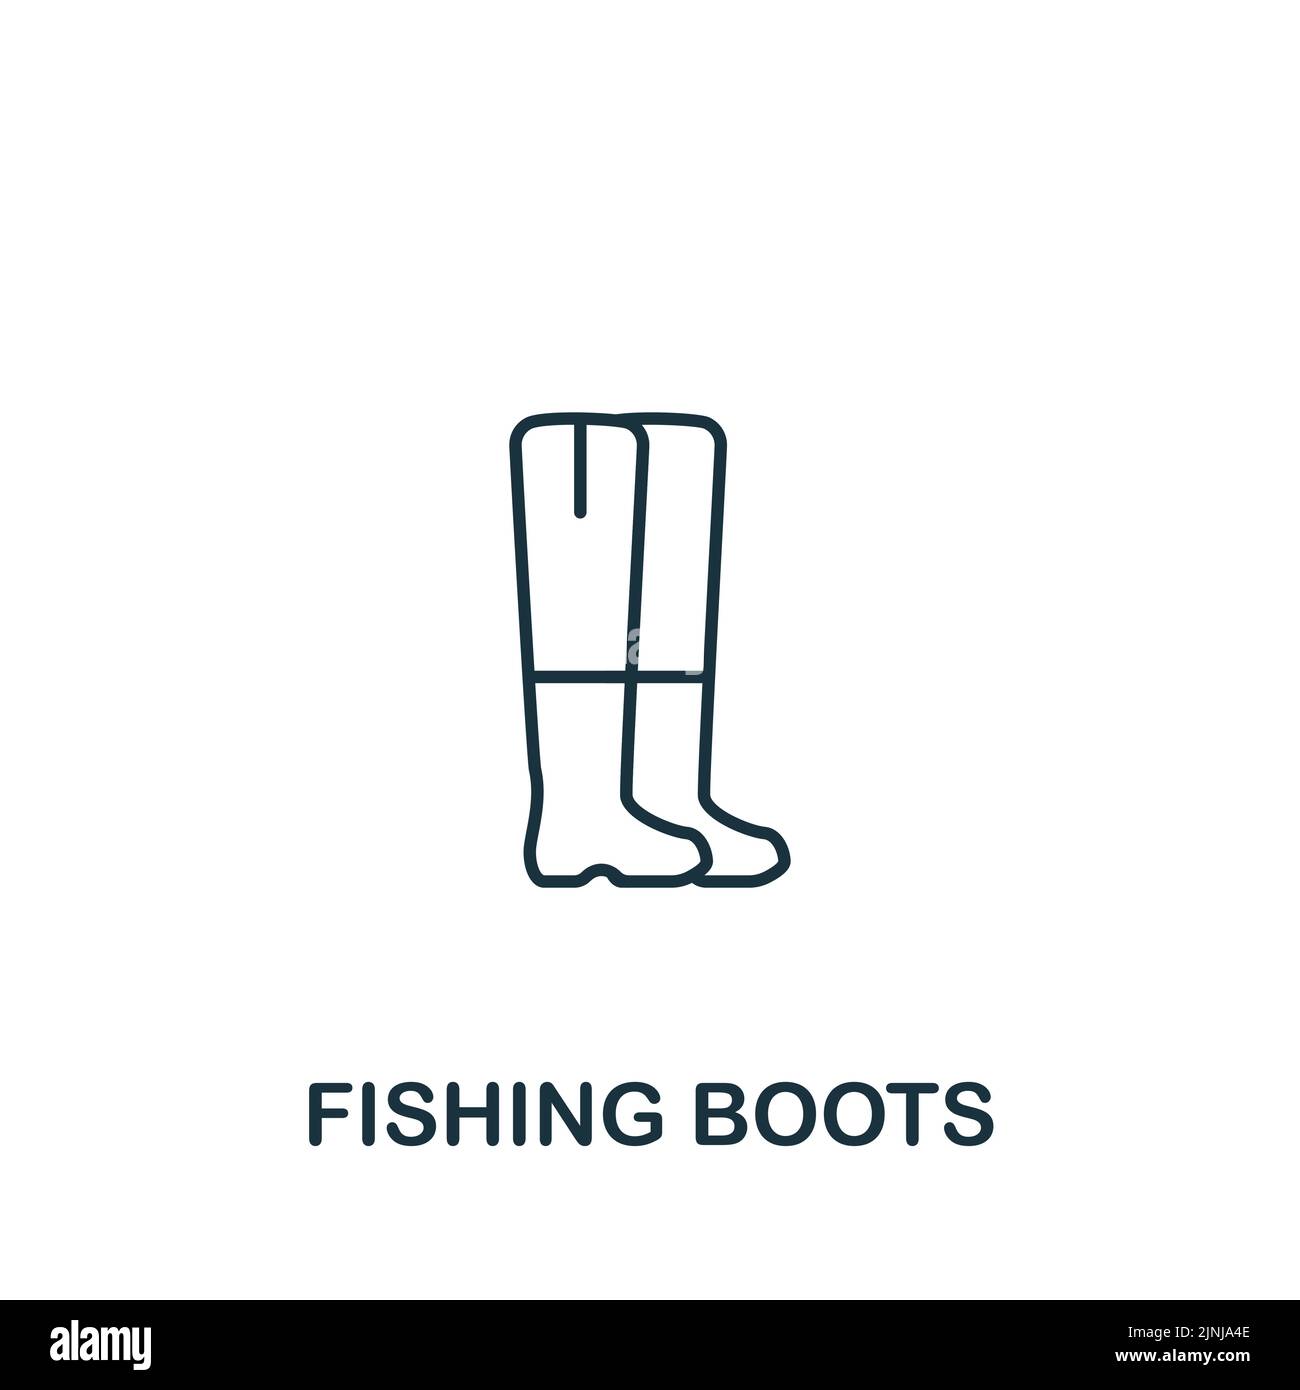 Fishing Boots icon. Monochrome simple Fishing icon for templates, web design and infographics Stock Vector